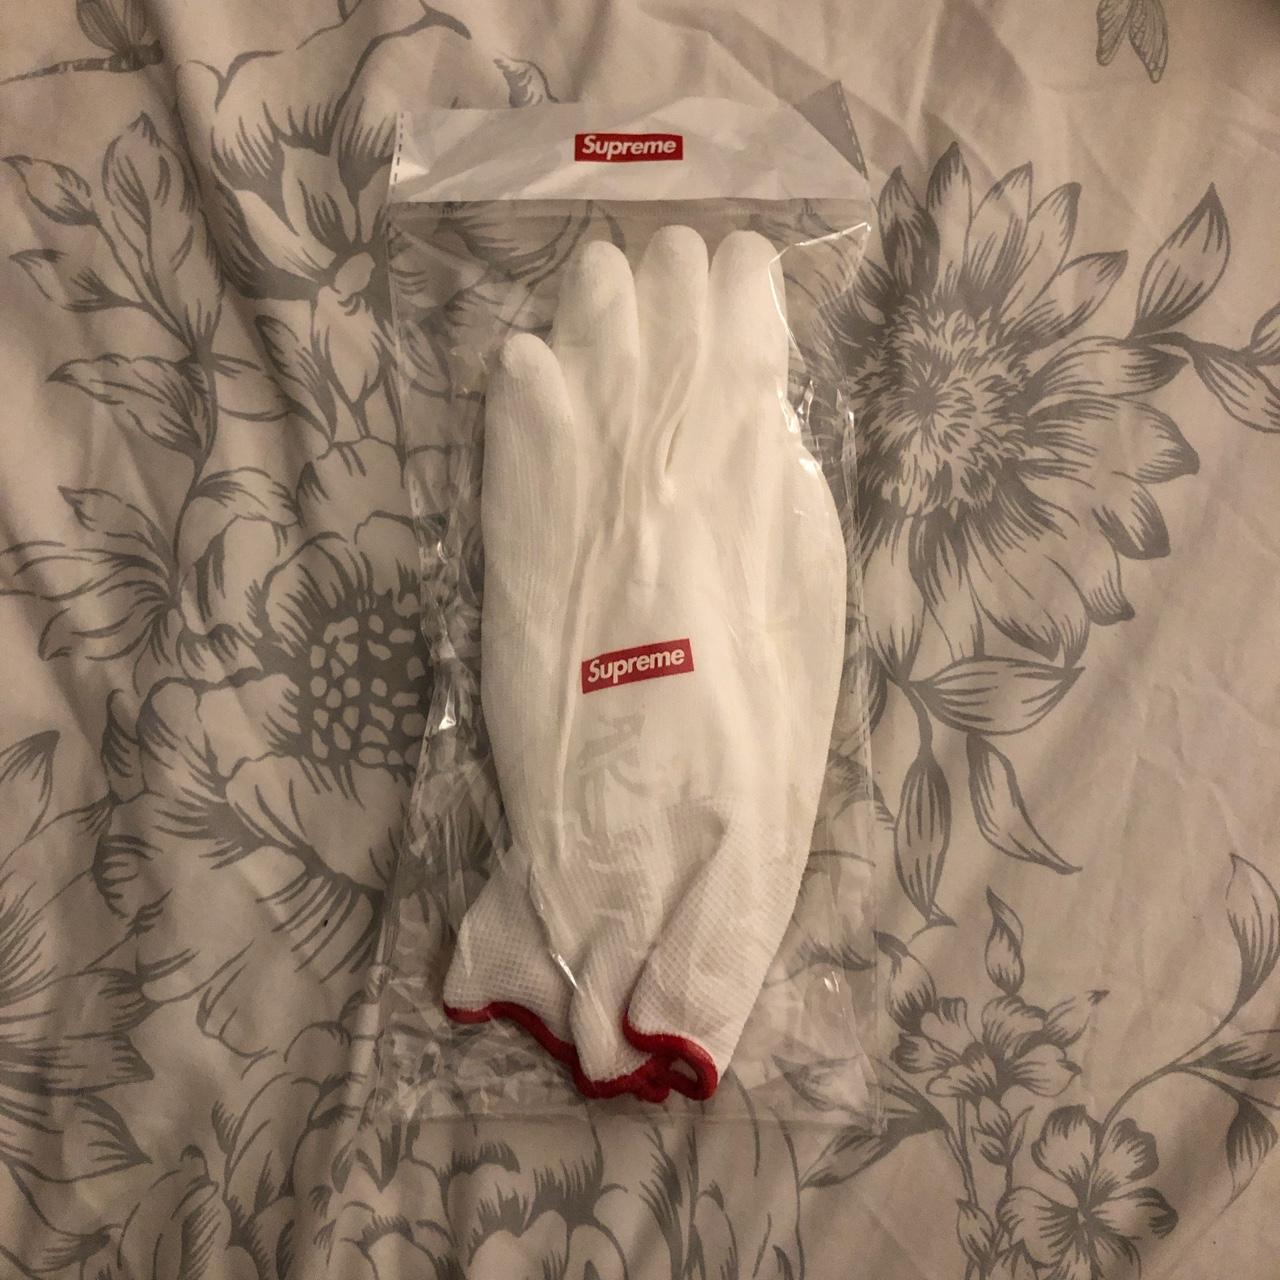 Supreme Rubber Collectors Gloves New and sealed in - Depop